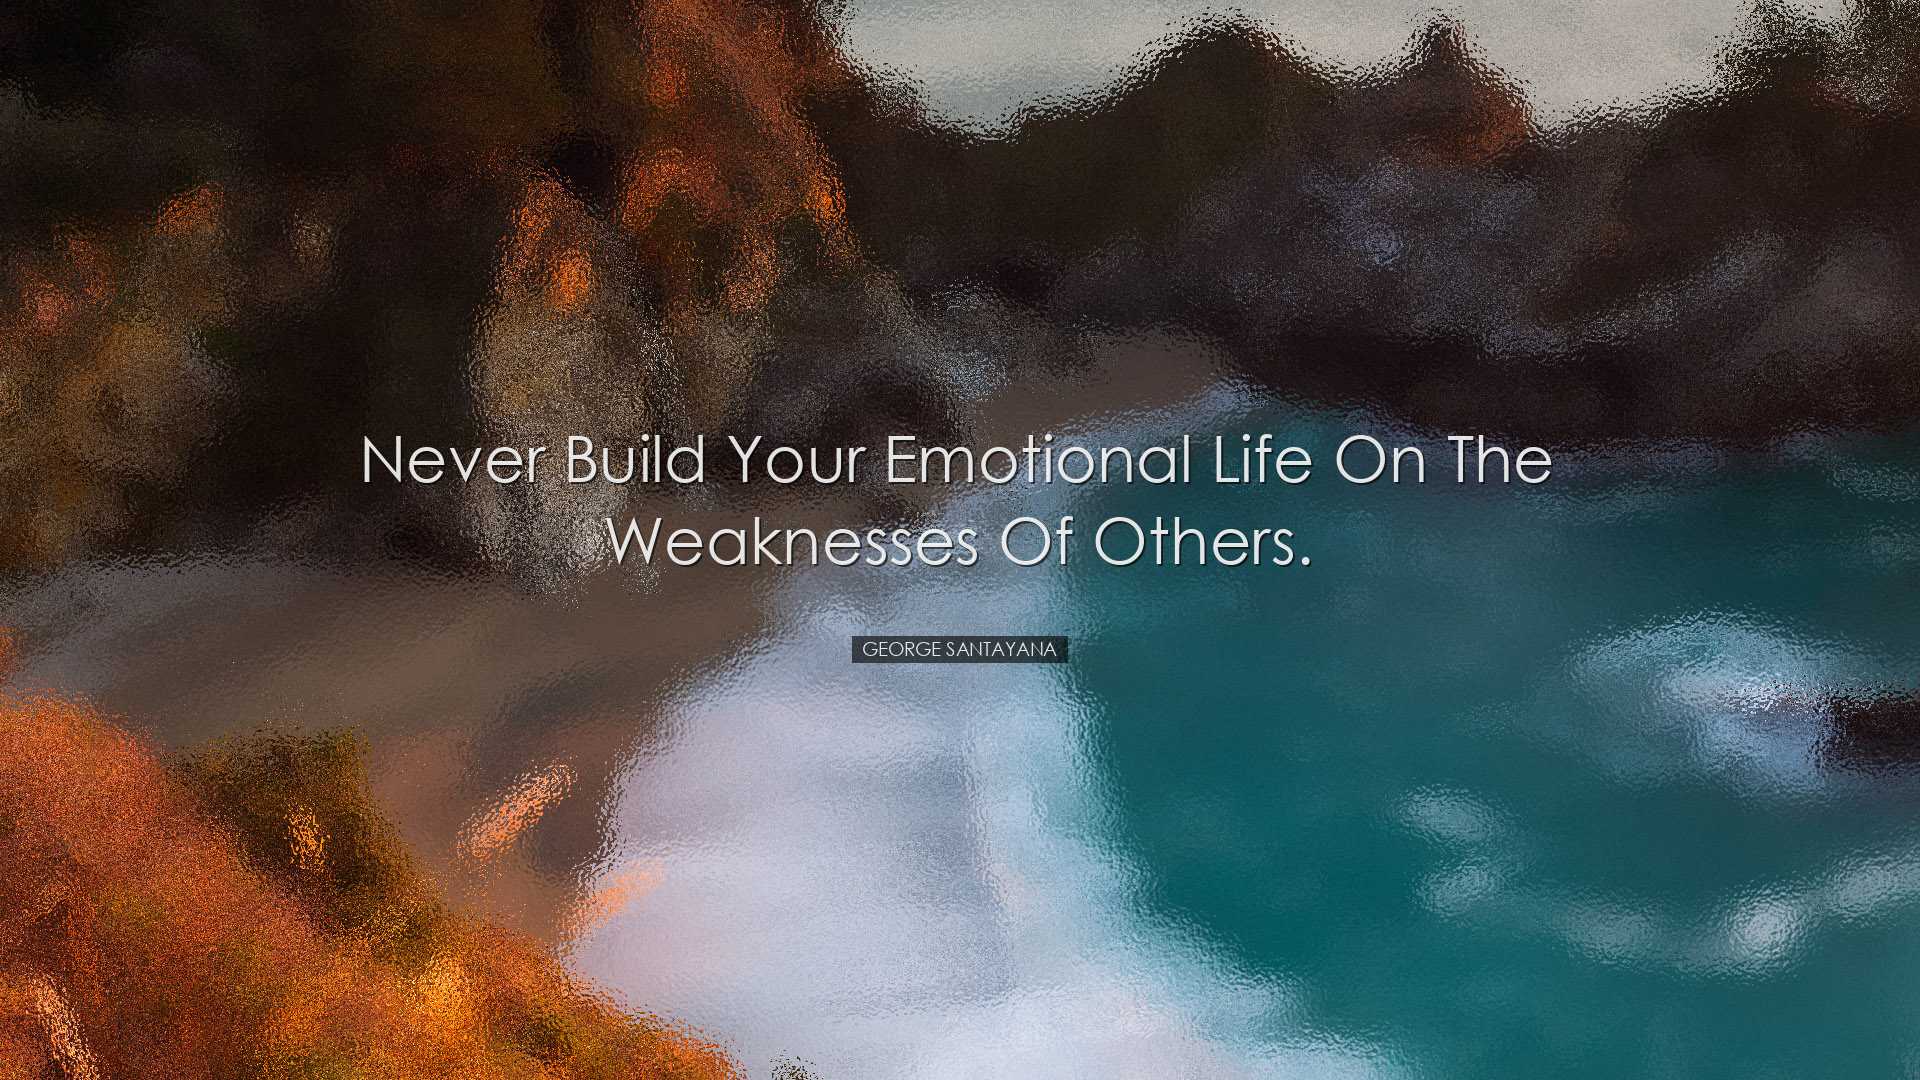 Never build your emotional life on the weaknesses of others. - Geo